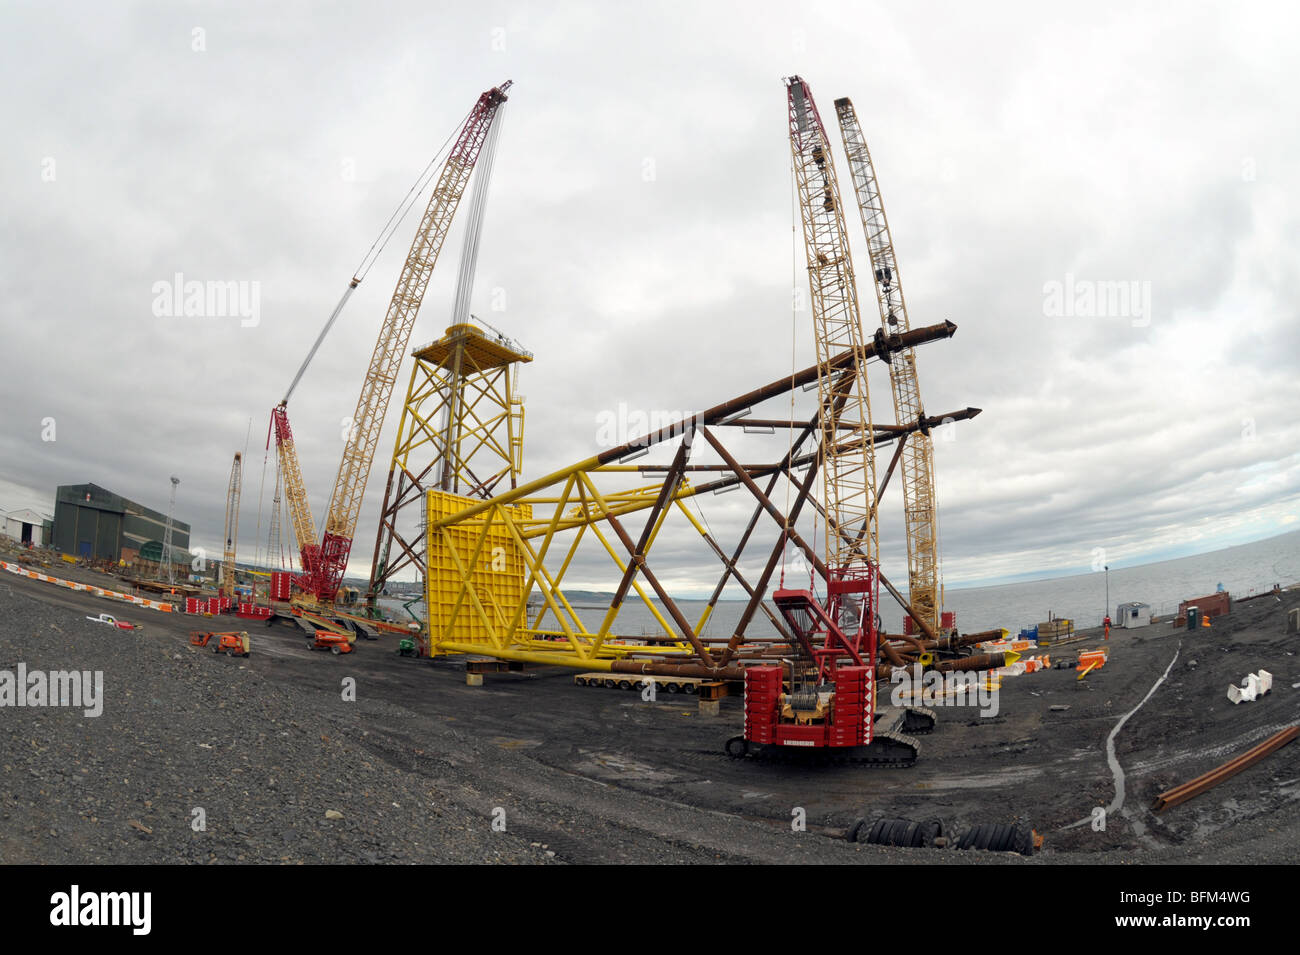 Sub sea supports for off shore wind turbines being built. Stock Photo